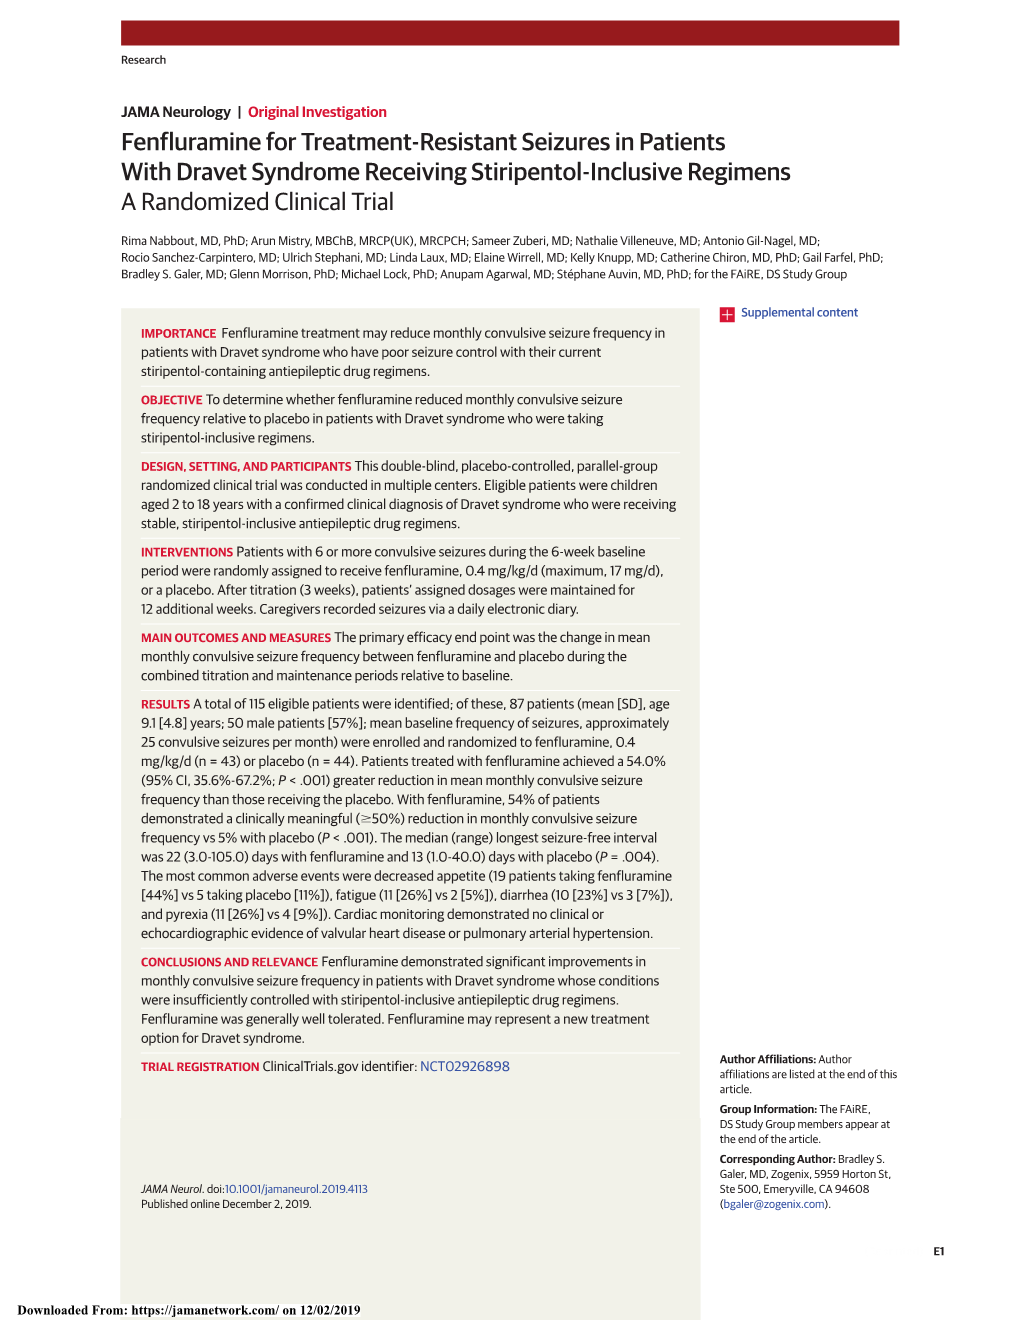 Fenfluramine for Treatment-Resistant Seizures in Patients with Dravet Syndrome Receiving Stiripentol-Inclusive Regimens a Randomized Clinical Trial